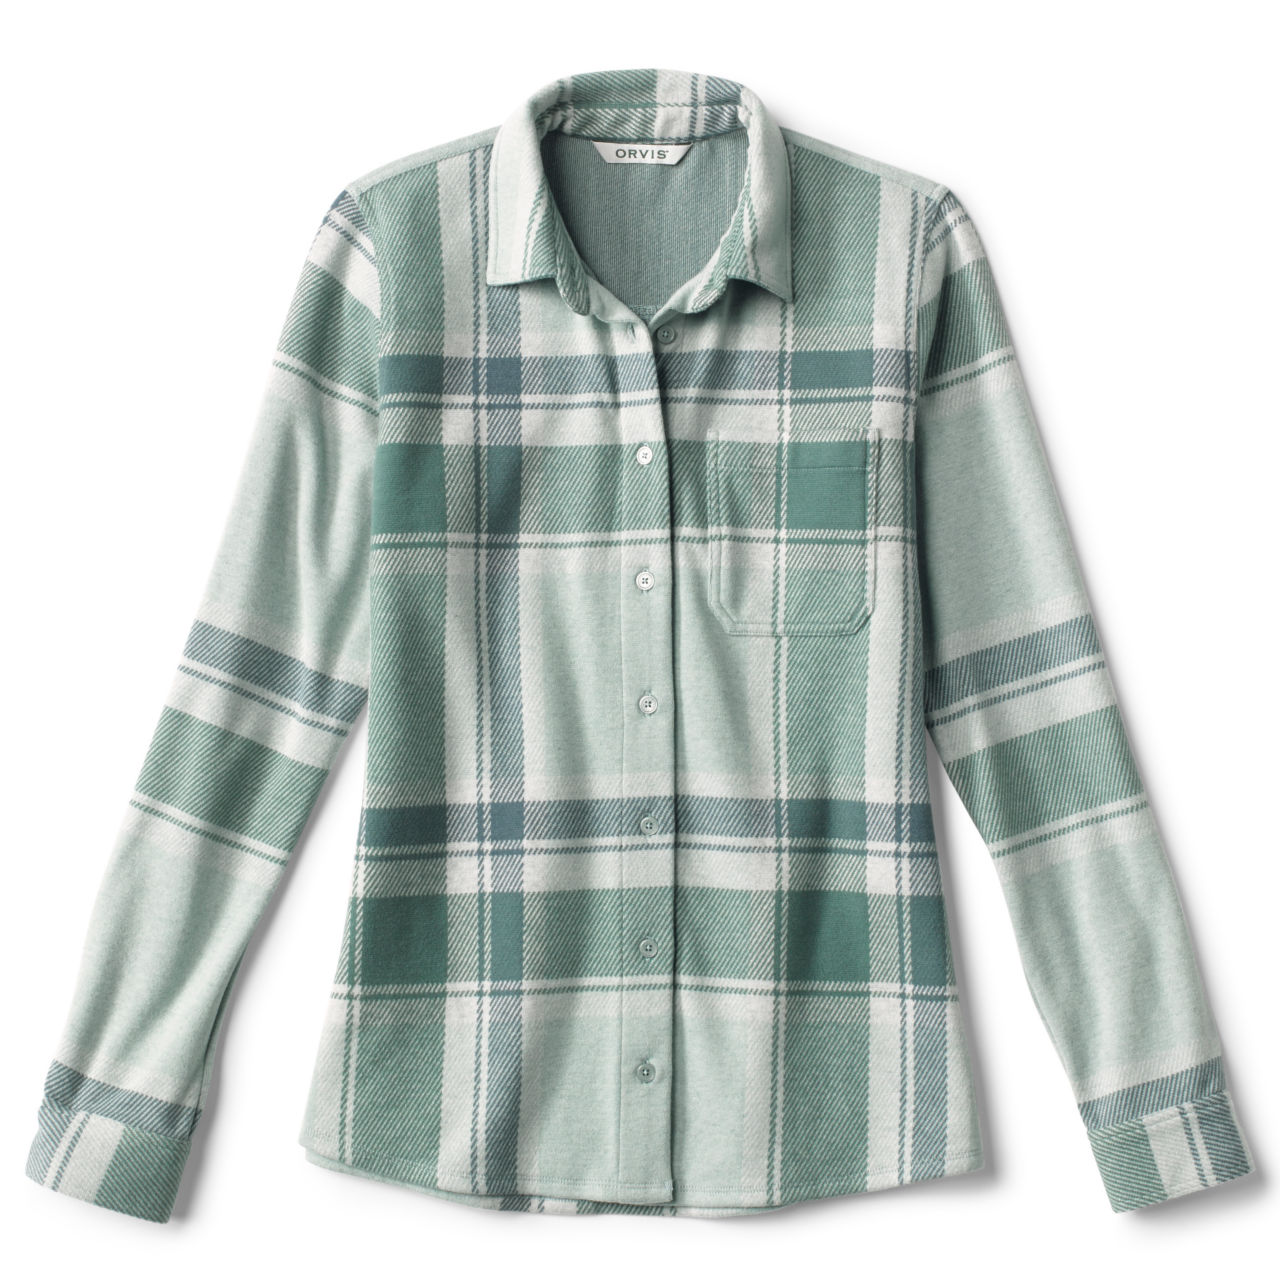 Women’s Snowy River Brushed Knit Long-Sleeved Shirt - SEA GLASS PLAID image number 0